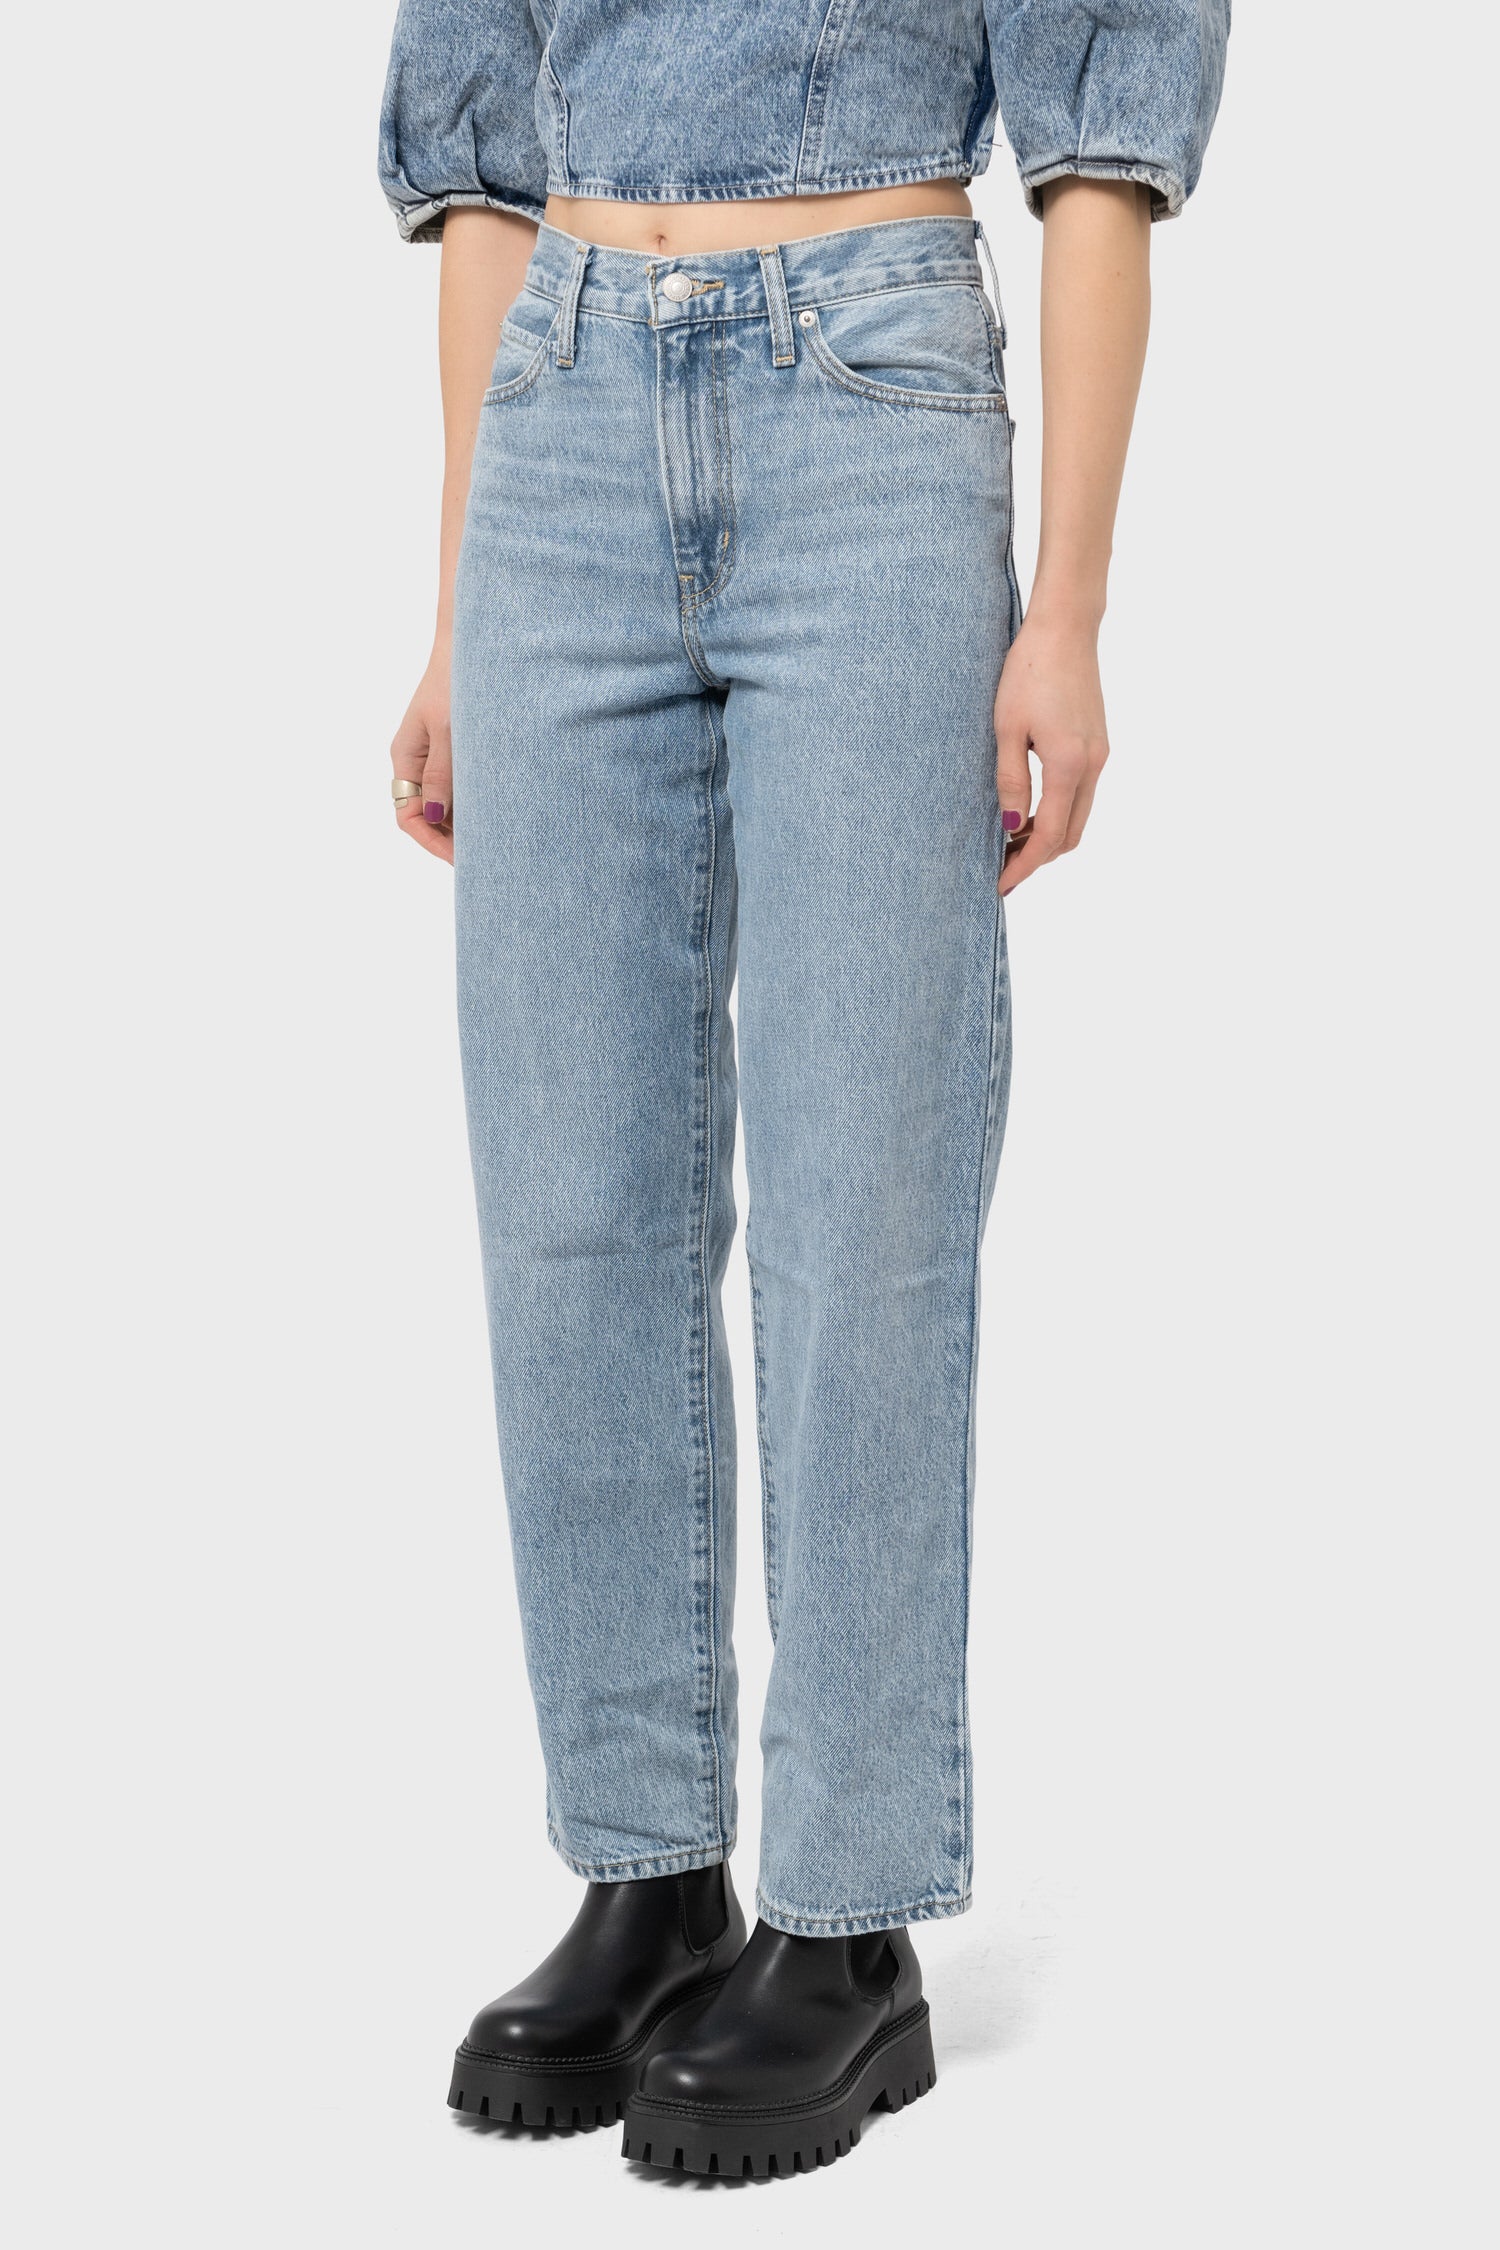 Women's Levi's '94 Baggy in Light Touch